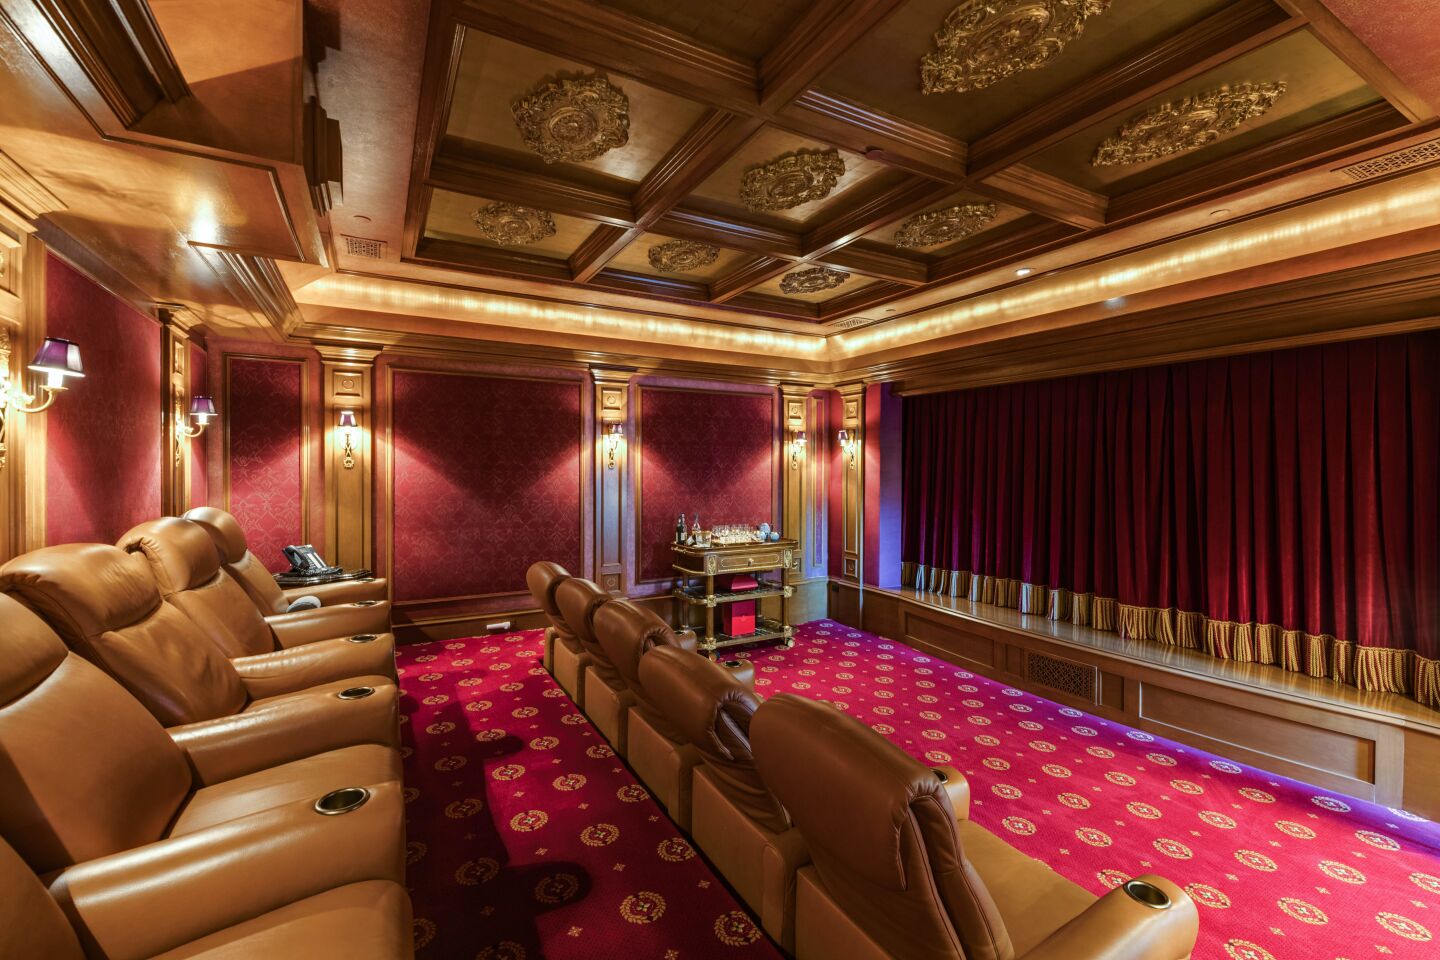 The carpeted movie theater with leather recliners an decorative panels on the ceiling.